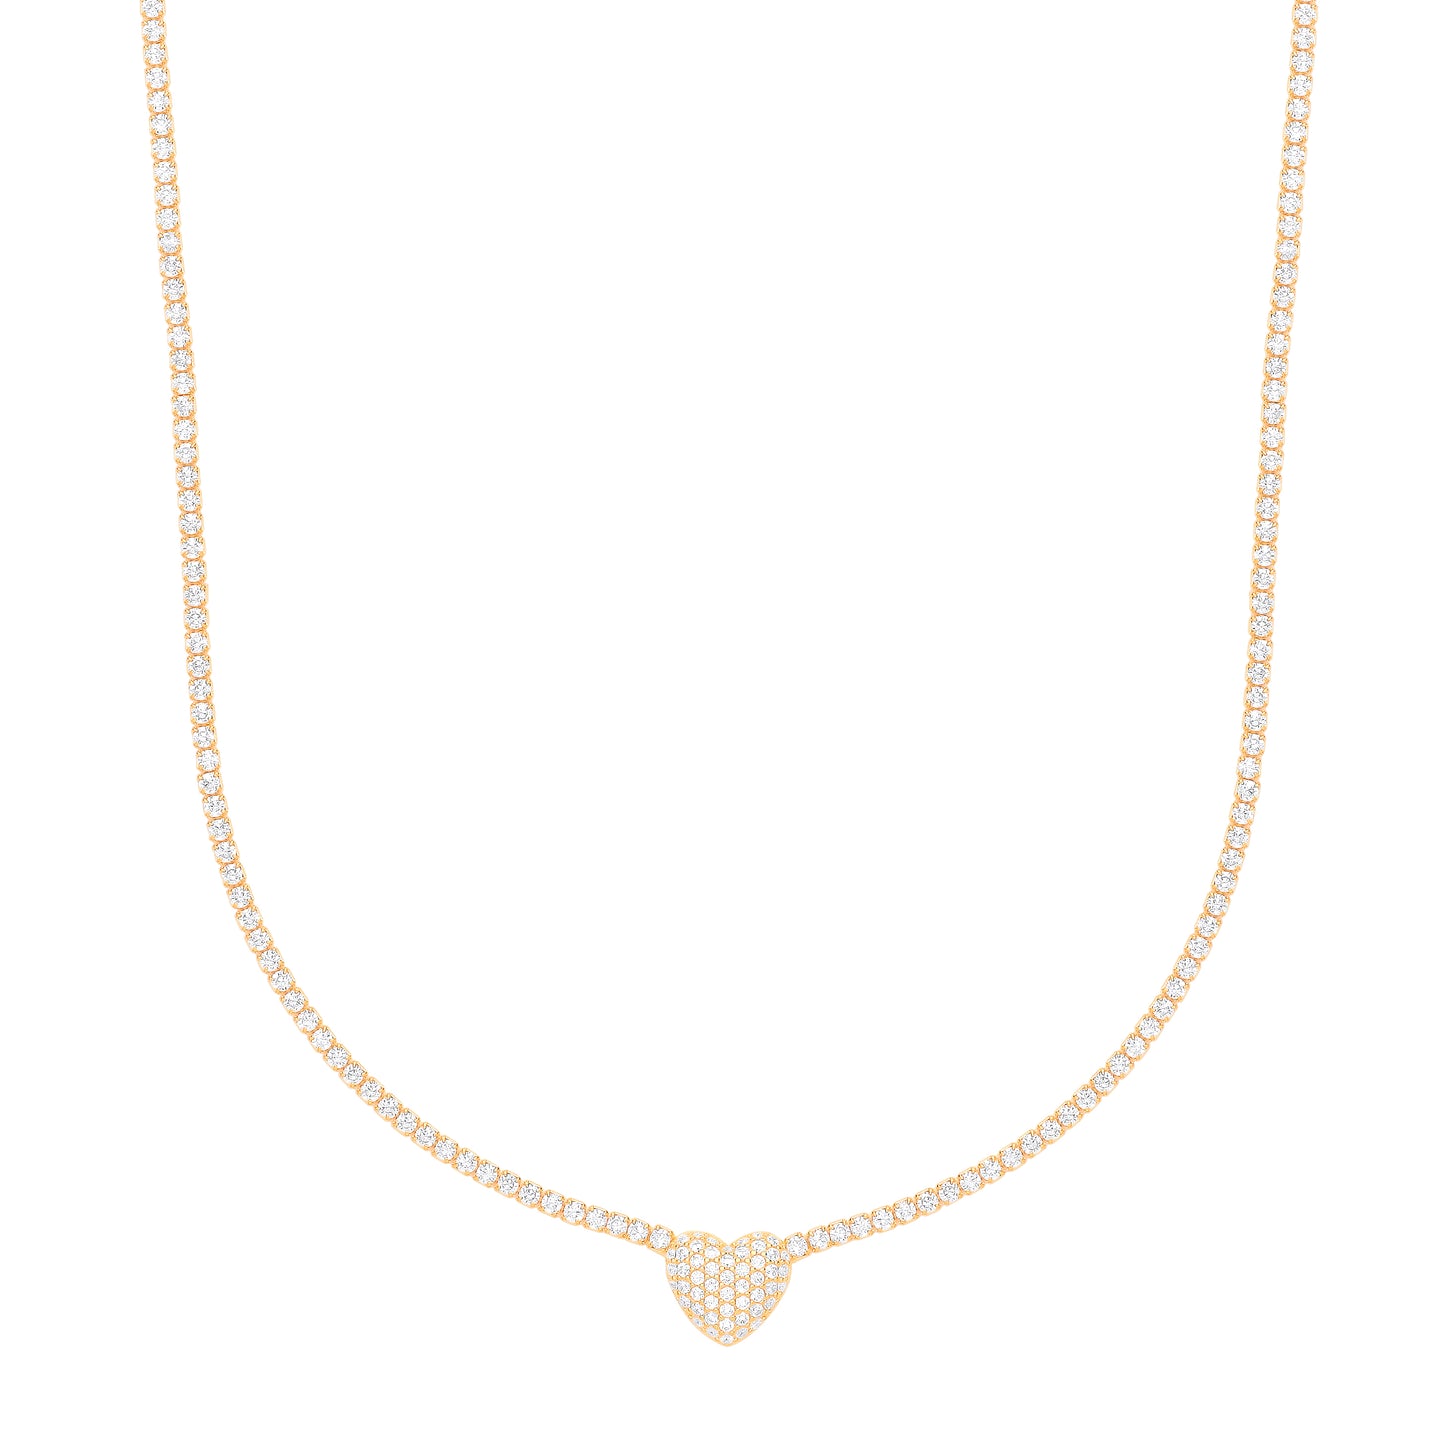 Gilded Silver  Pave Encrusted Love Heart Tennis Necklace - GVK403